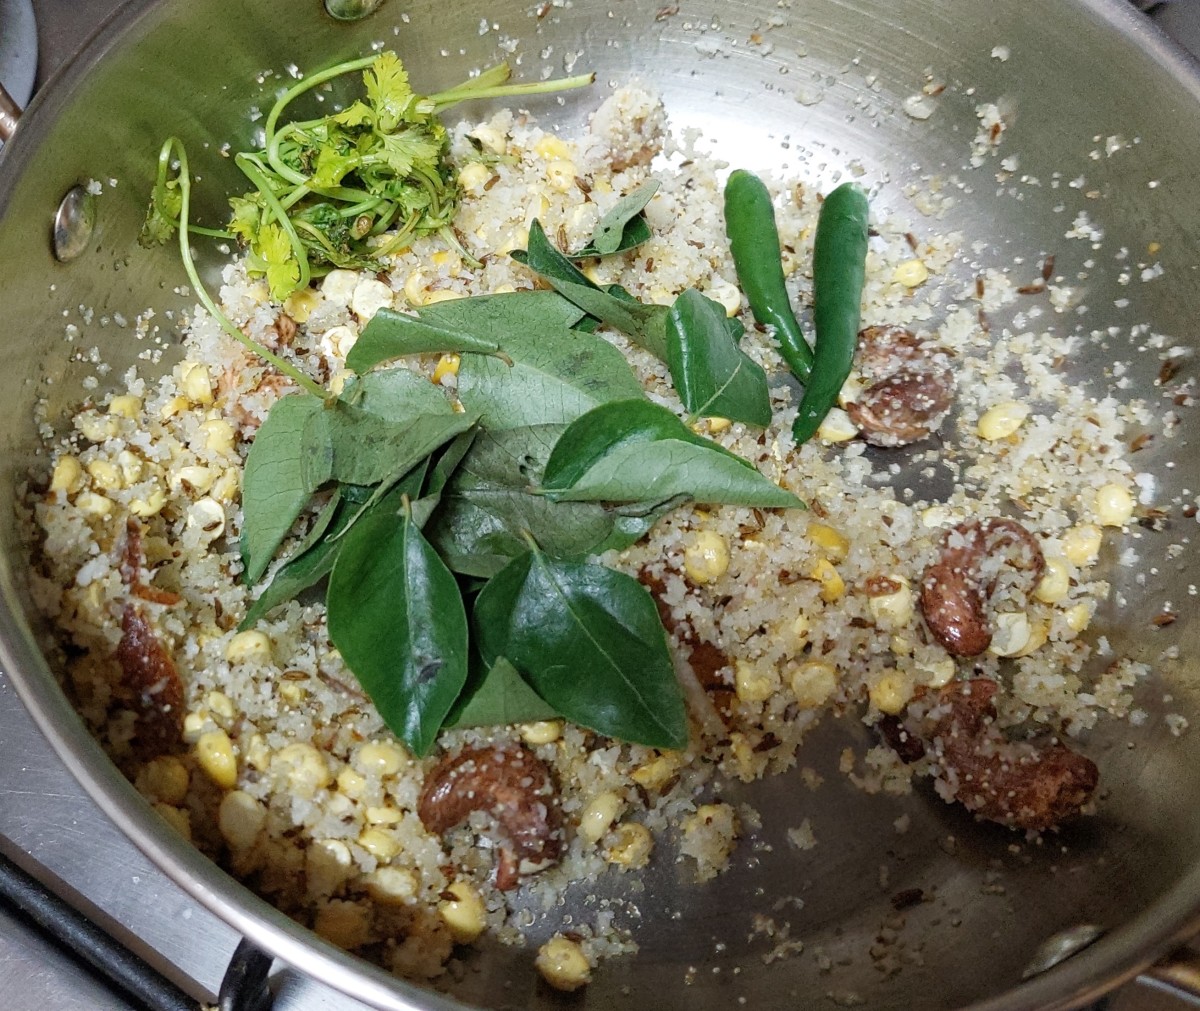 Add 1-2 green chilies (or to taste), 1-2 sprigs of curry leaves and 1-2 tablespoons of coriander leaves.